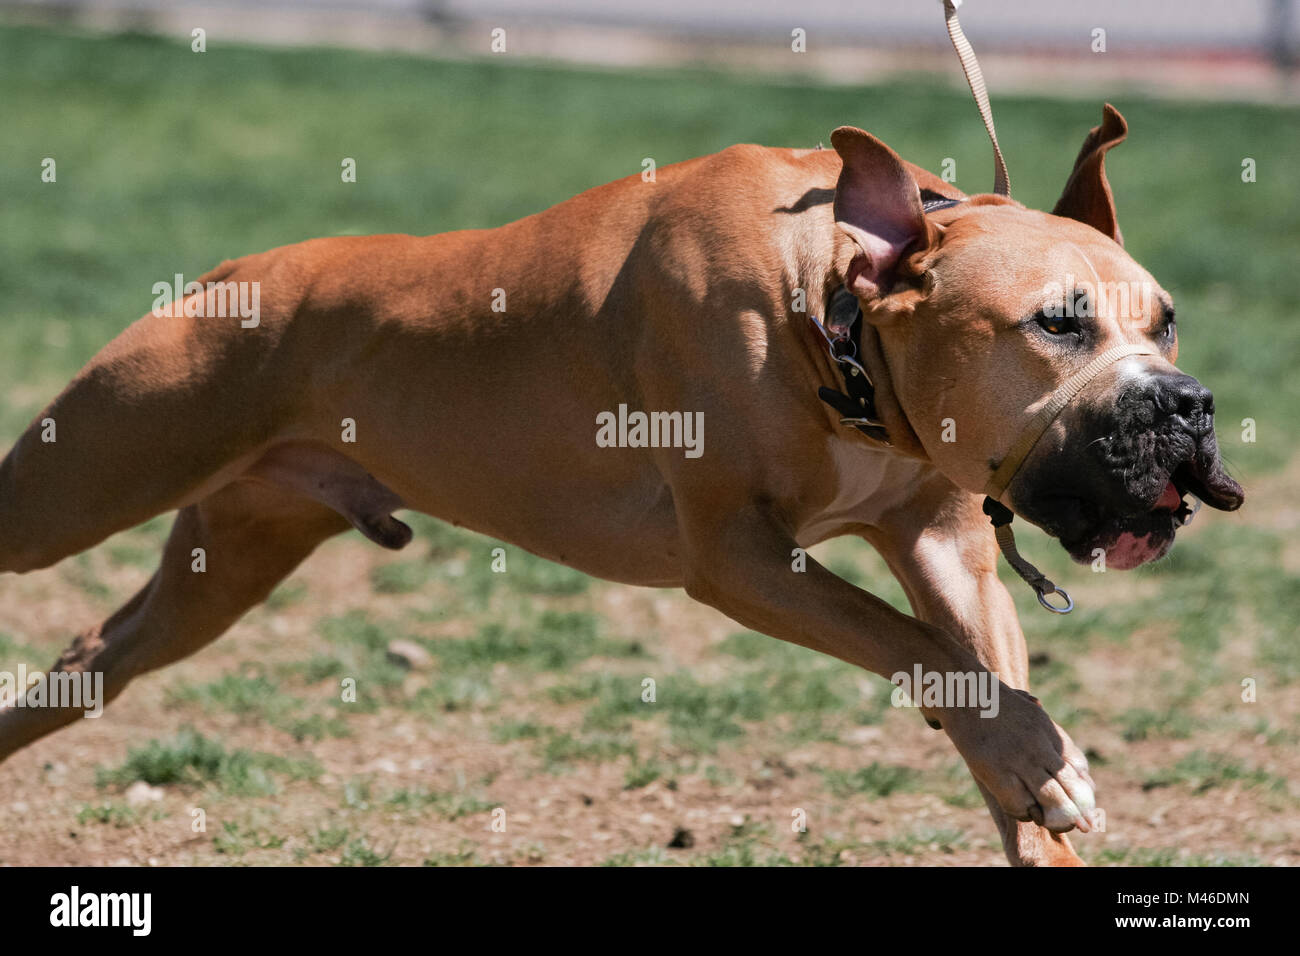 Dog with a nose collar on running and playing at the park Stock Photo